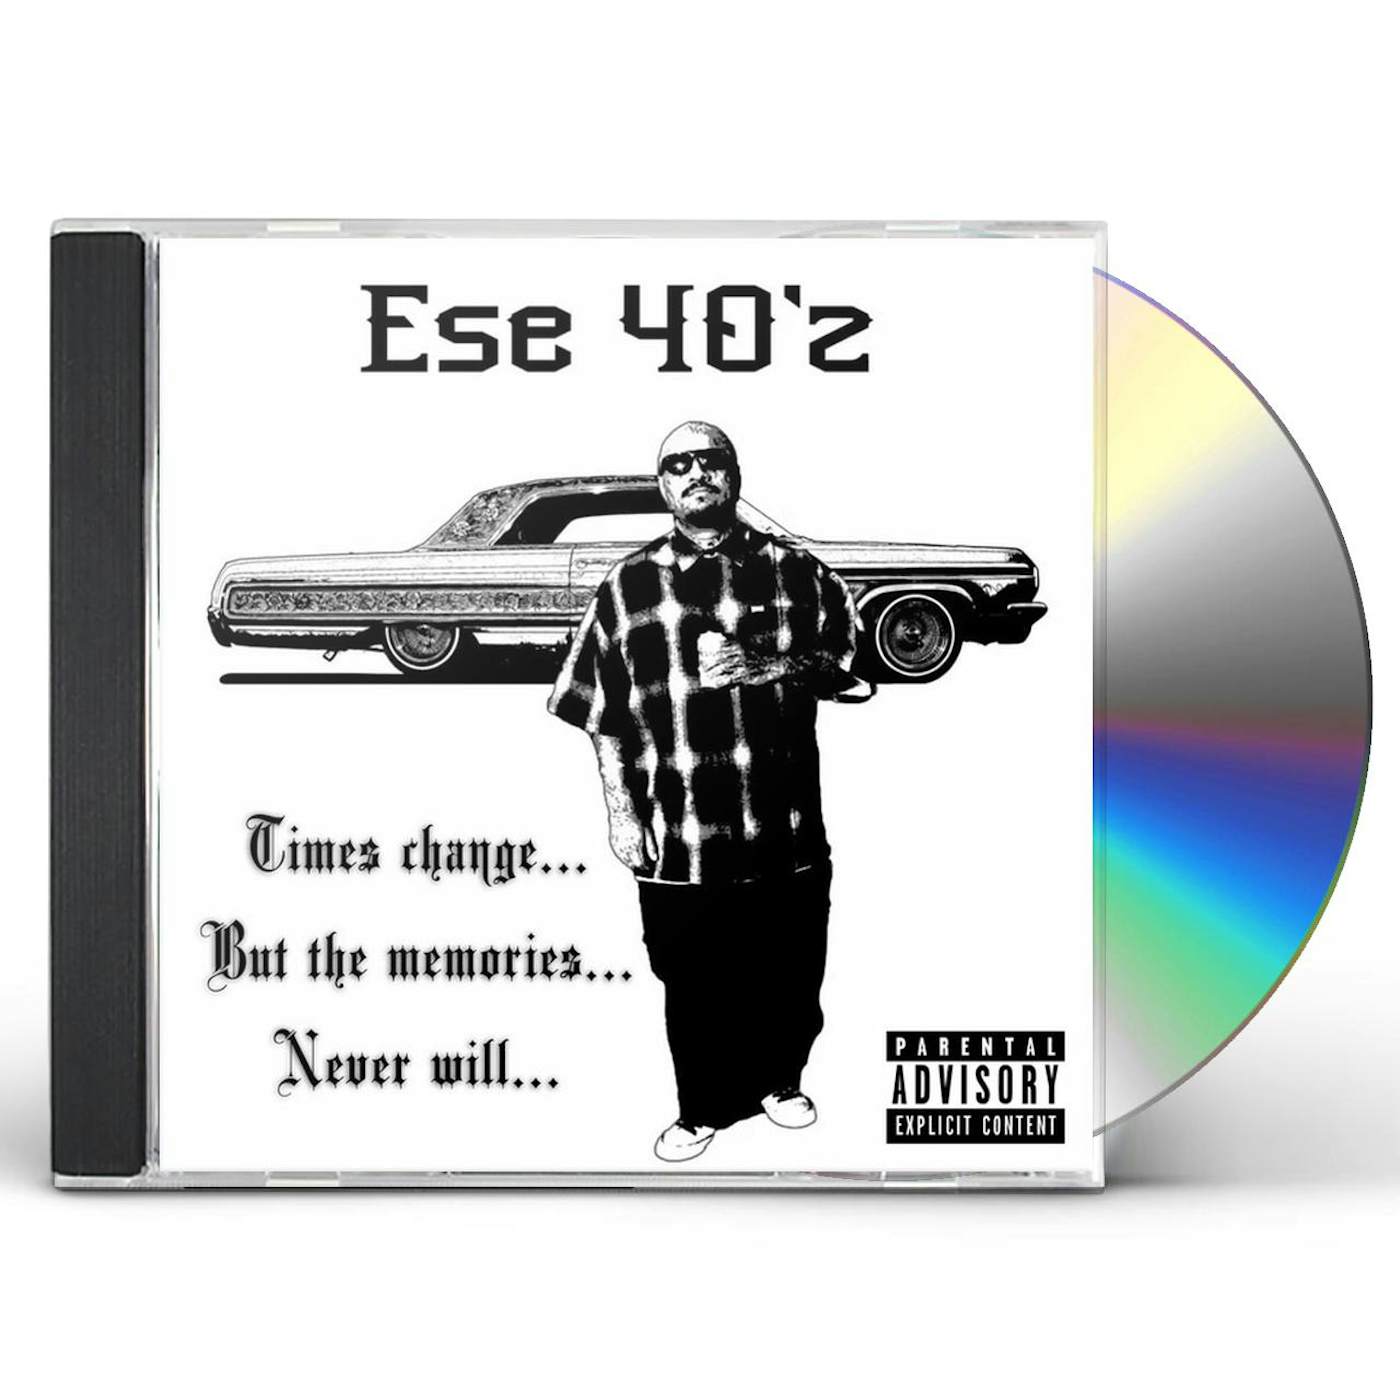 Ese 40'z TIMES CHANGE BUT THE MEMORIES NEVER WILL CD